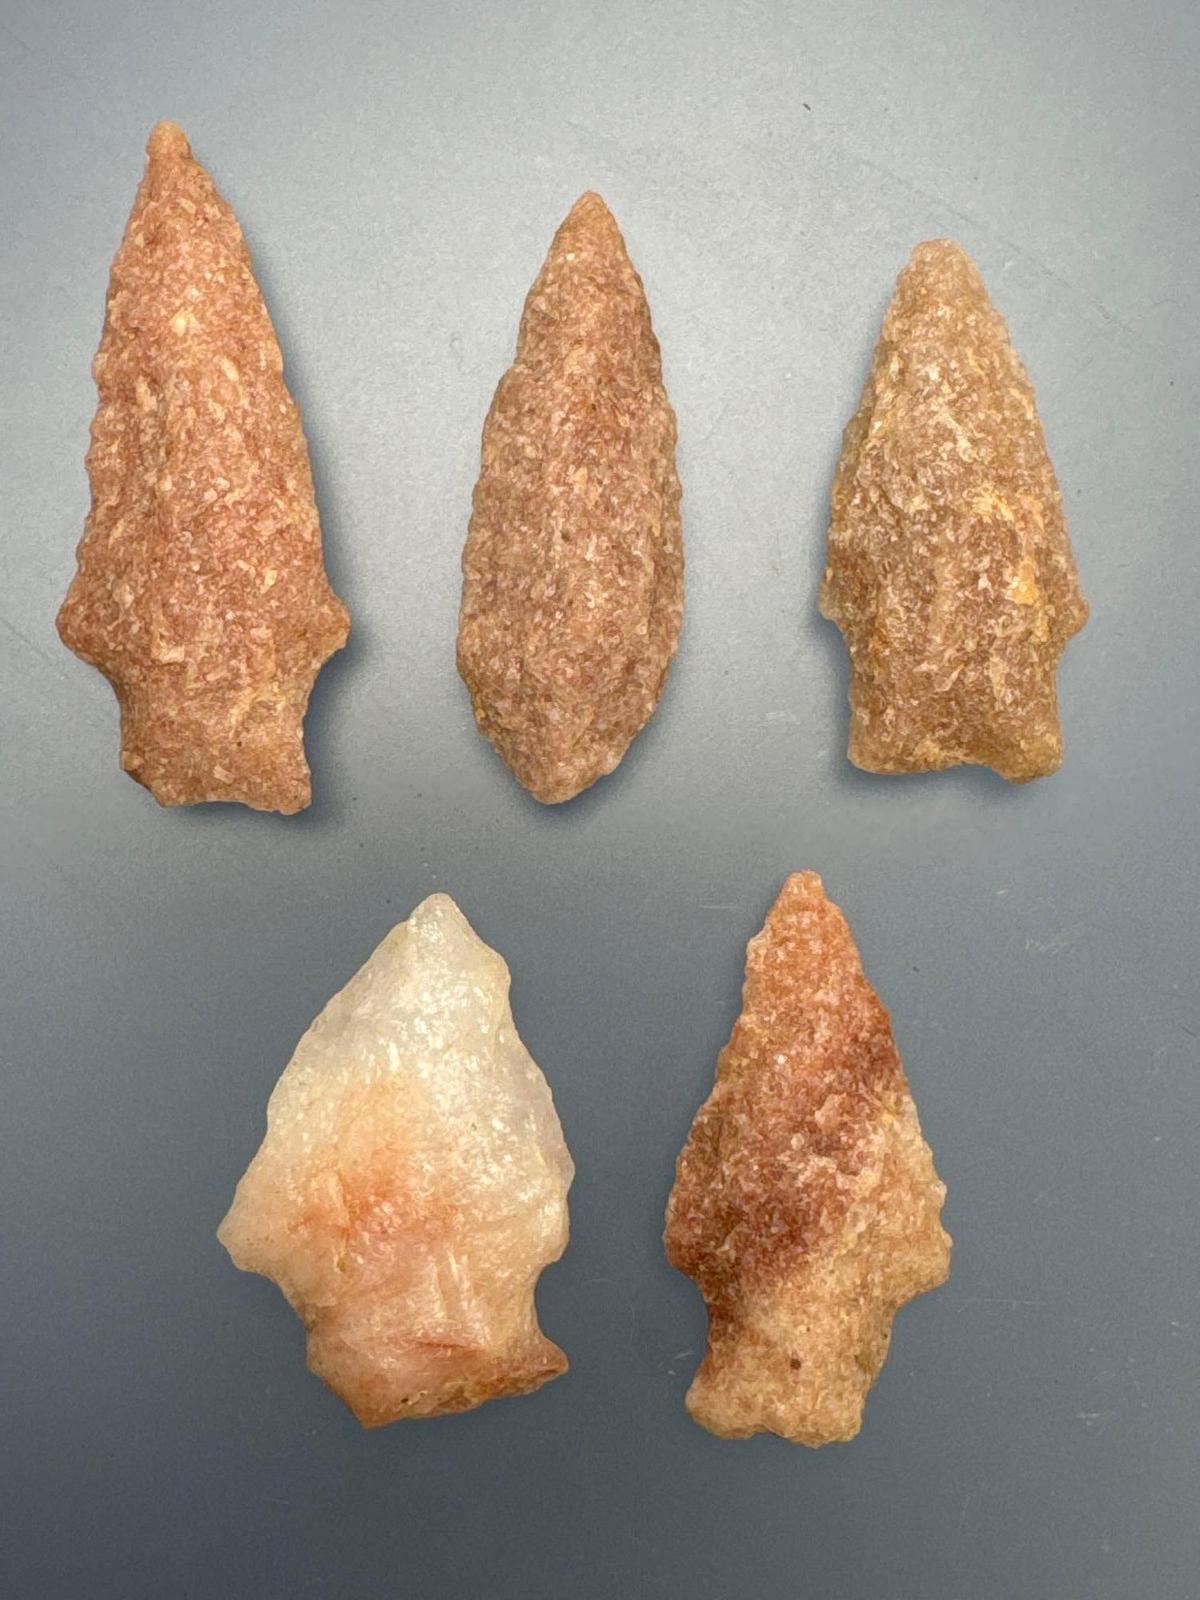 Lot o 5 Pink Quartzite ( Rose Quartz) Arrowheads, Longest is 1 15/16", Found in Cecil Co., Maryland